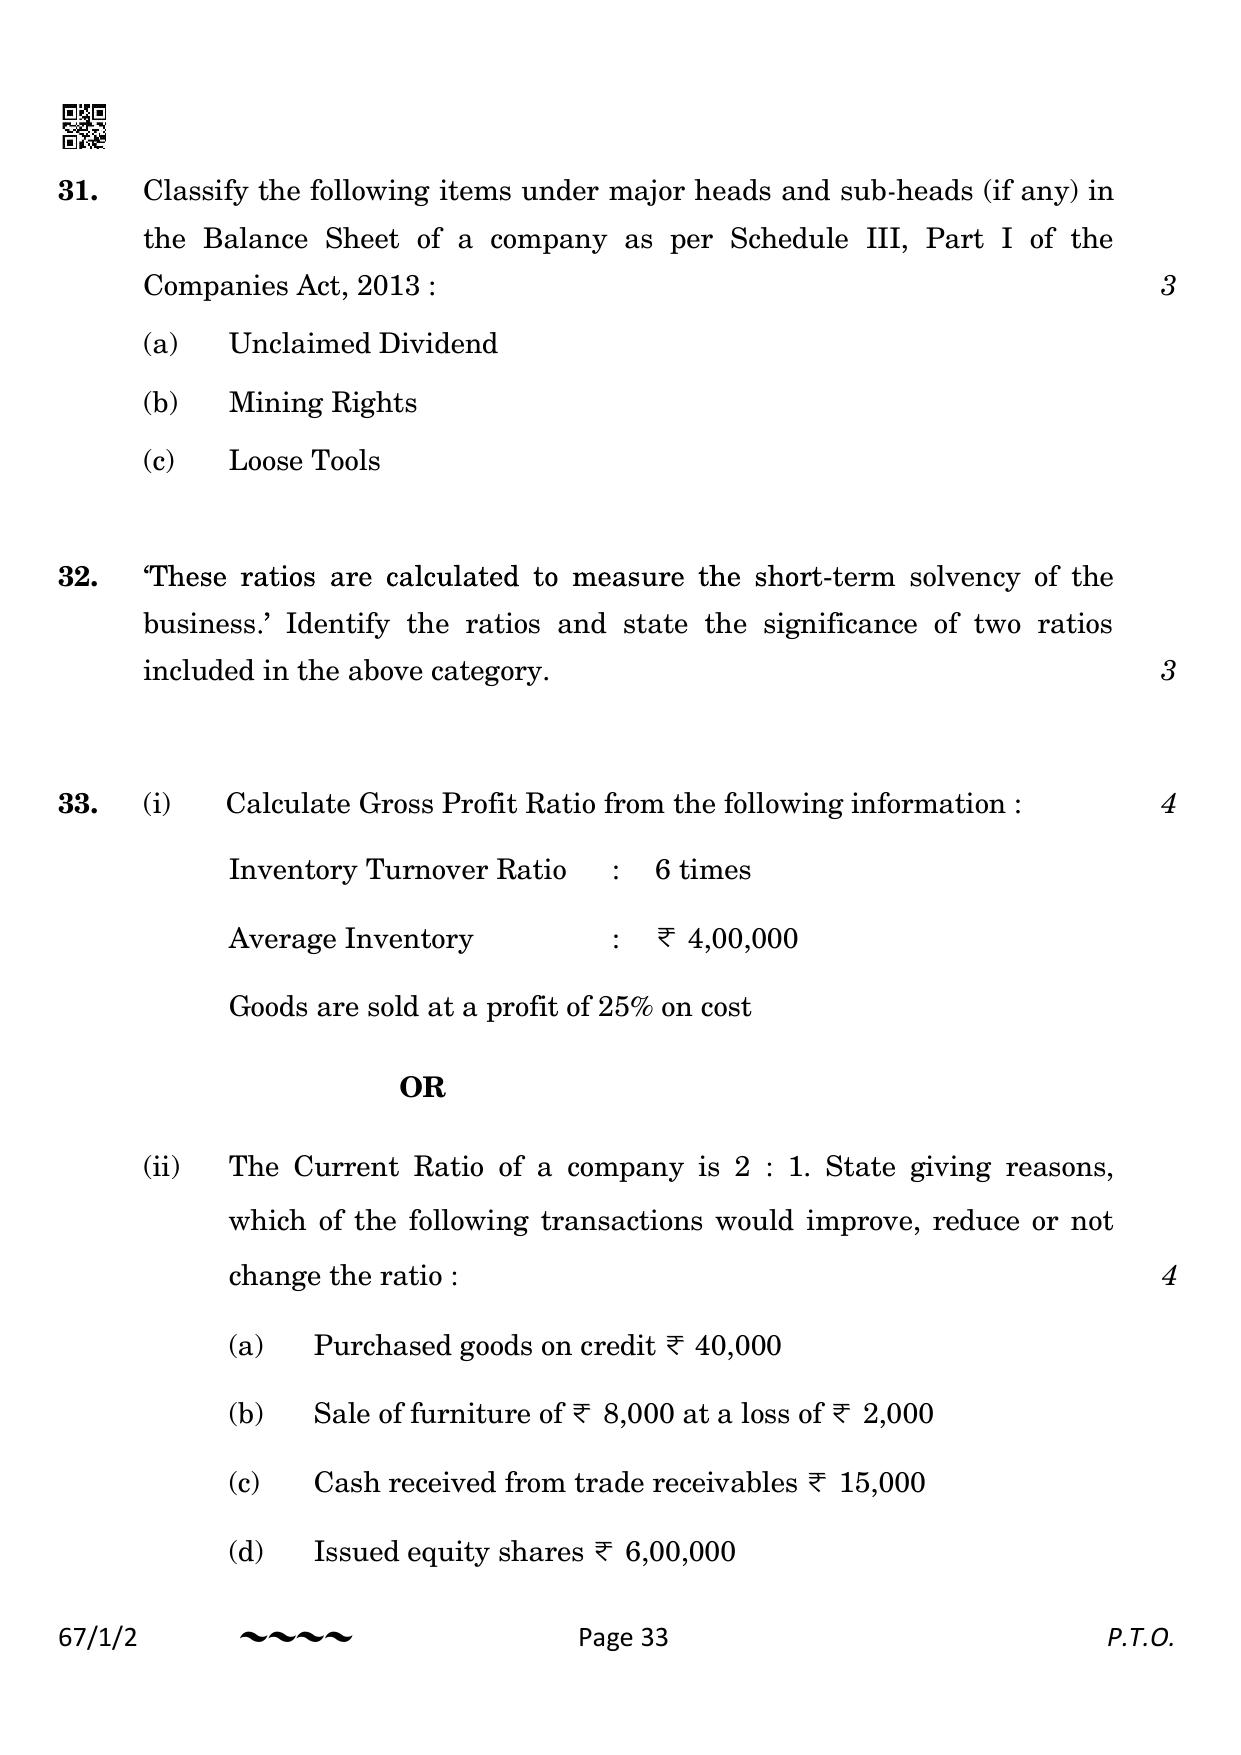 CBSE Class 12 67-1-2 Accountancy 2023 Question Paper - Page 33